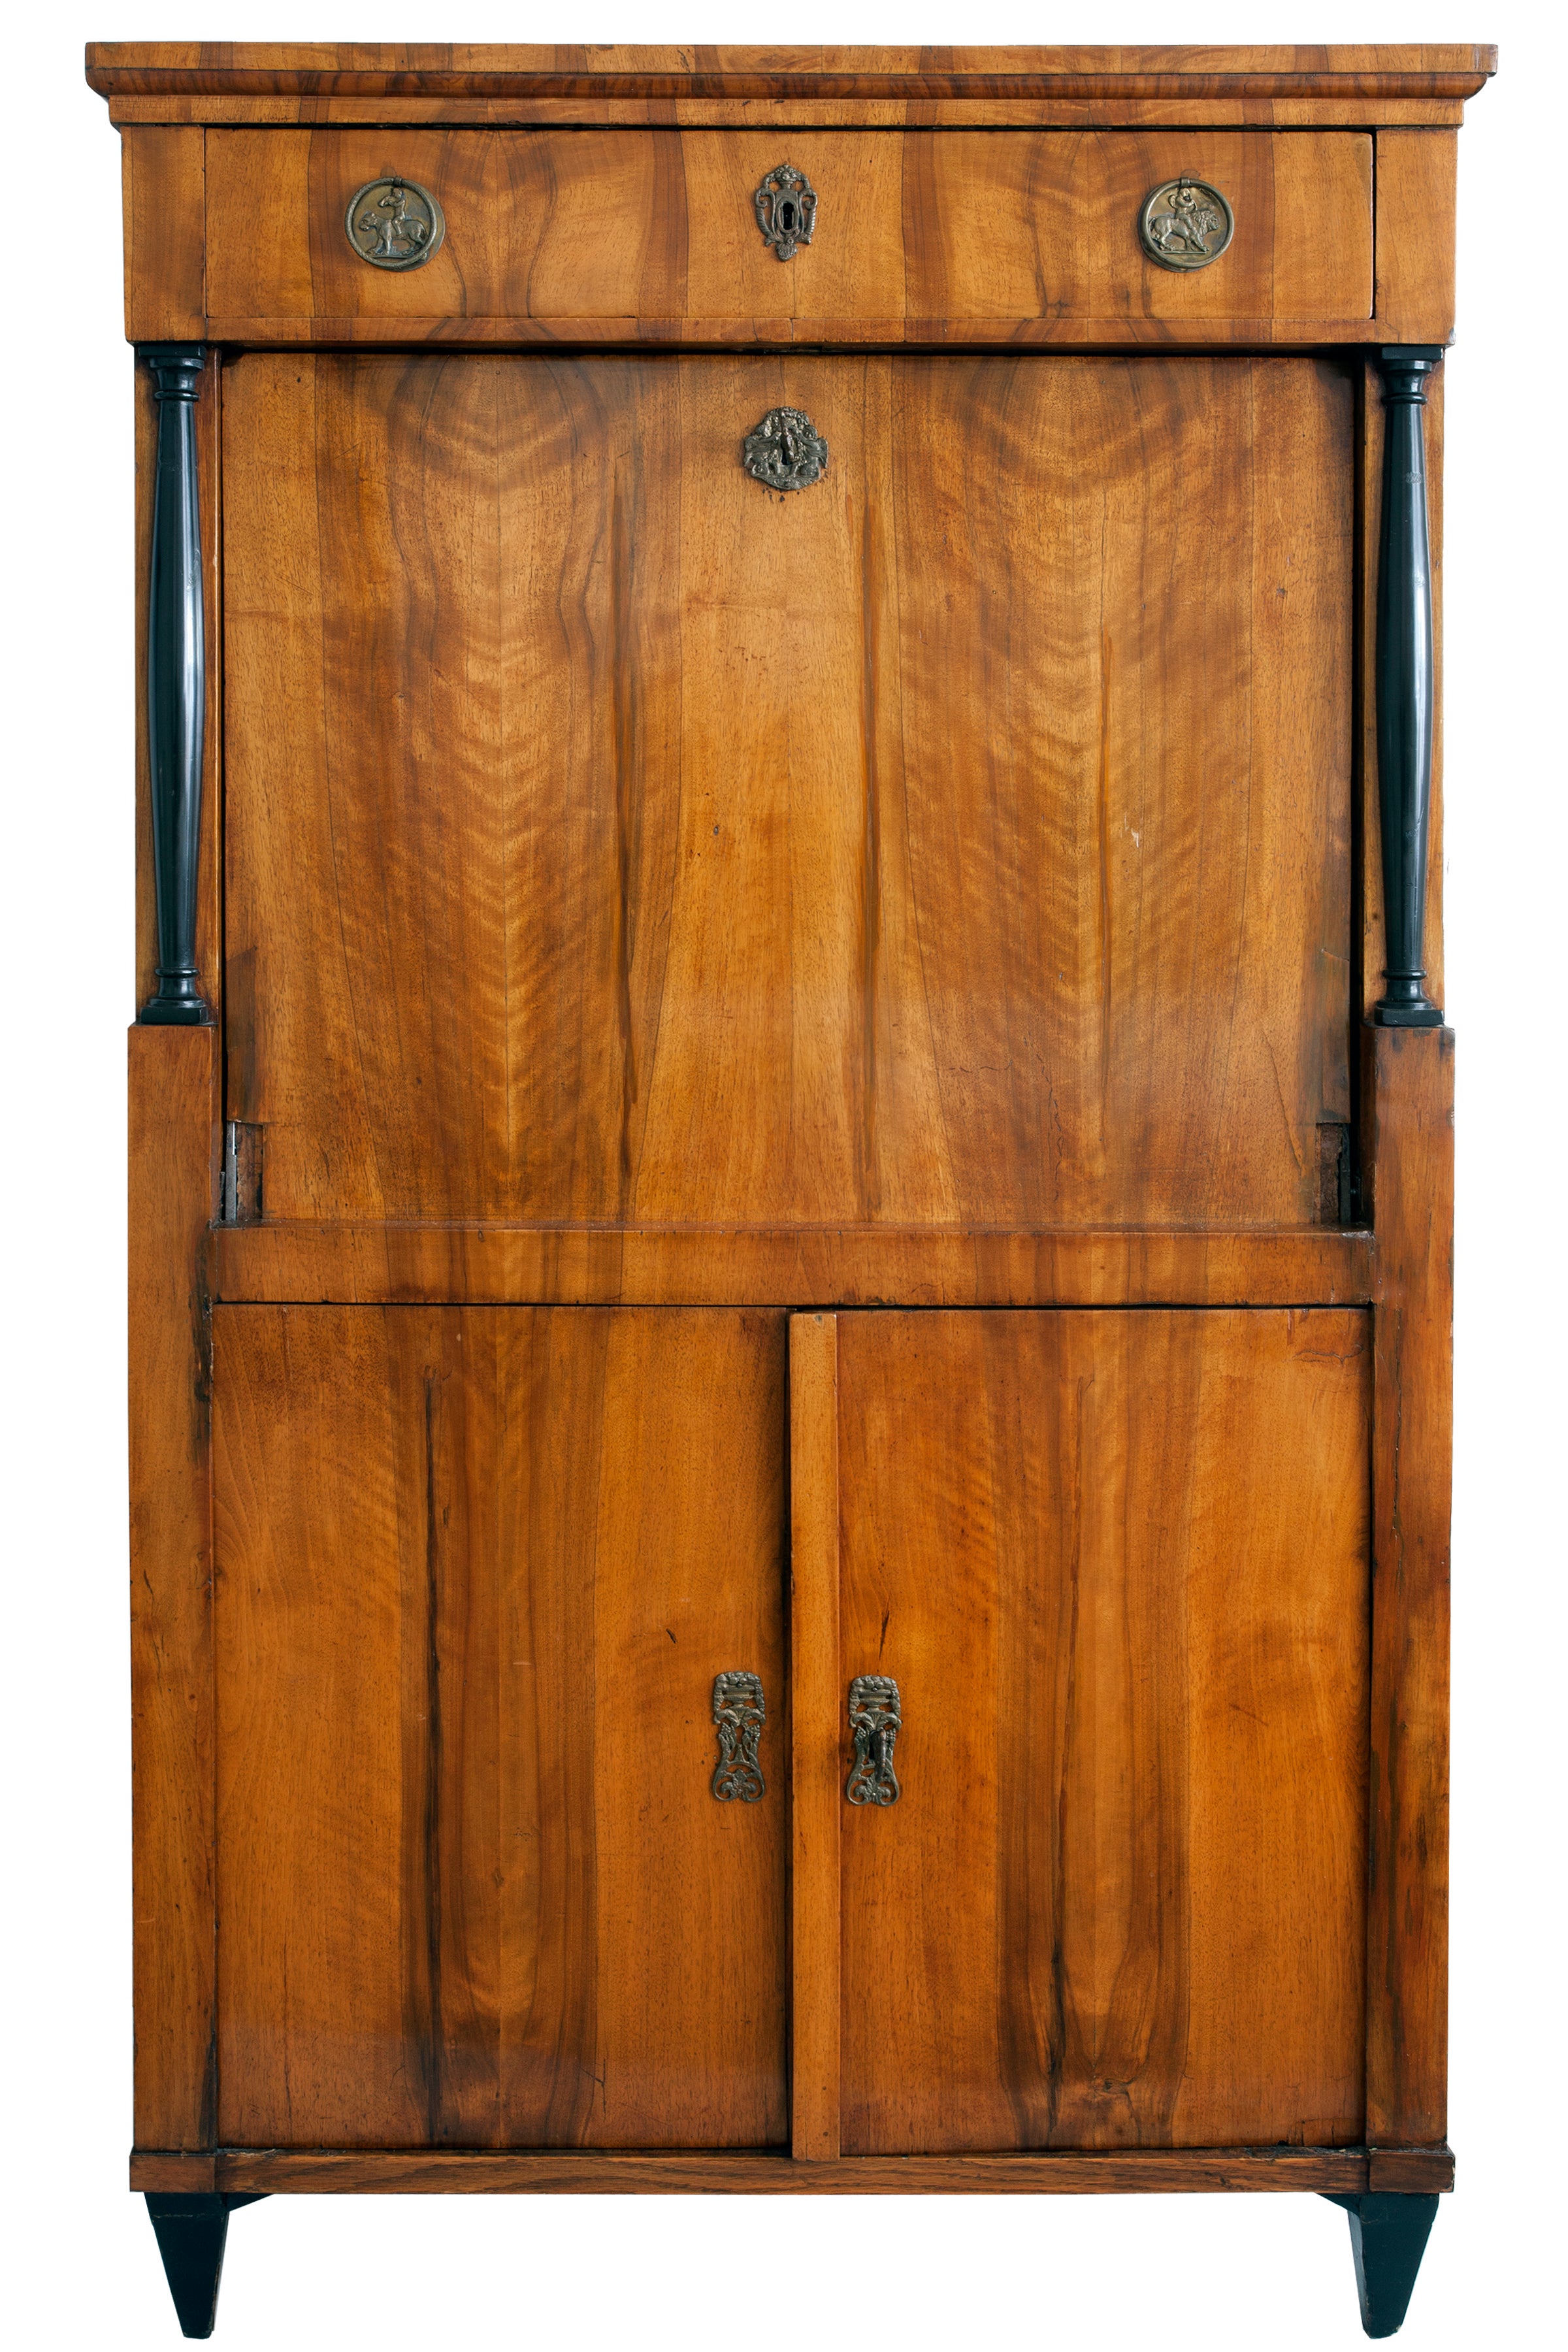 This early 19th-century drop-leaf secretaire features the traditional Biedermeier ebony accents, columns, and matched woodgrain pattern. Unlike the high gloss finish of many pieces from this period, the wood has a less formal soft-matte patina, with